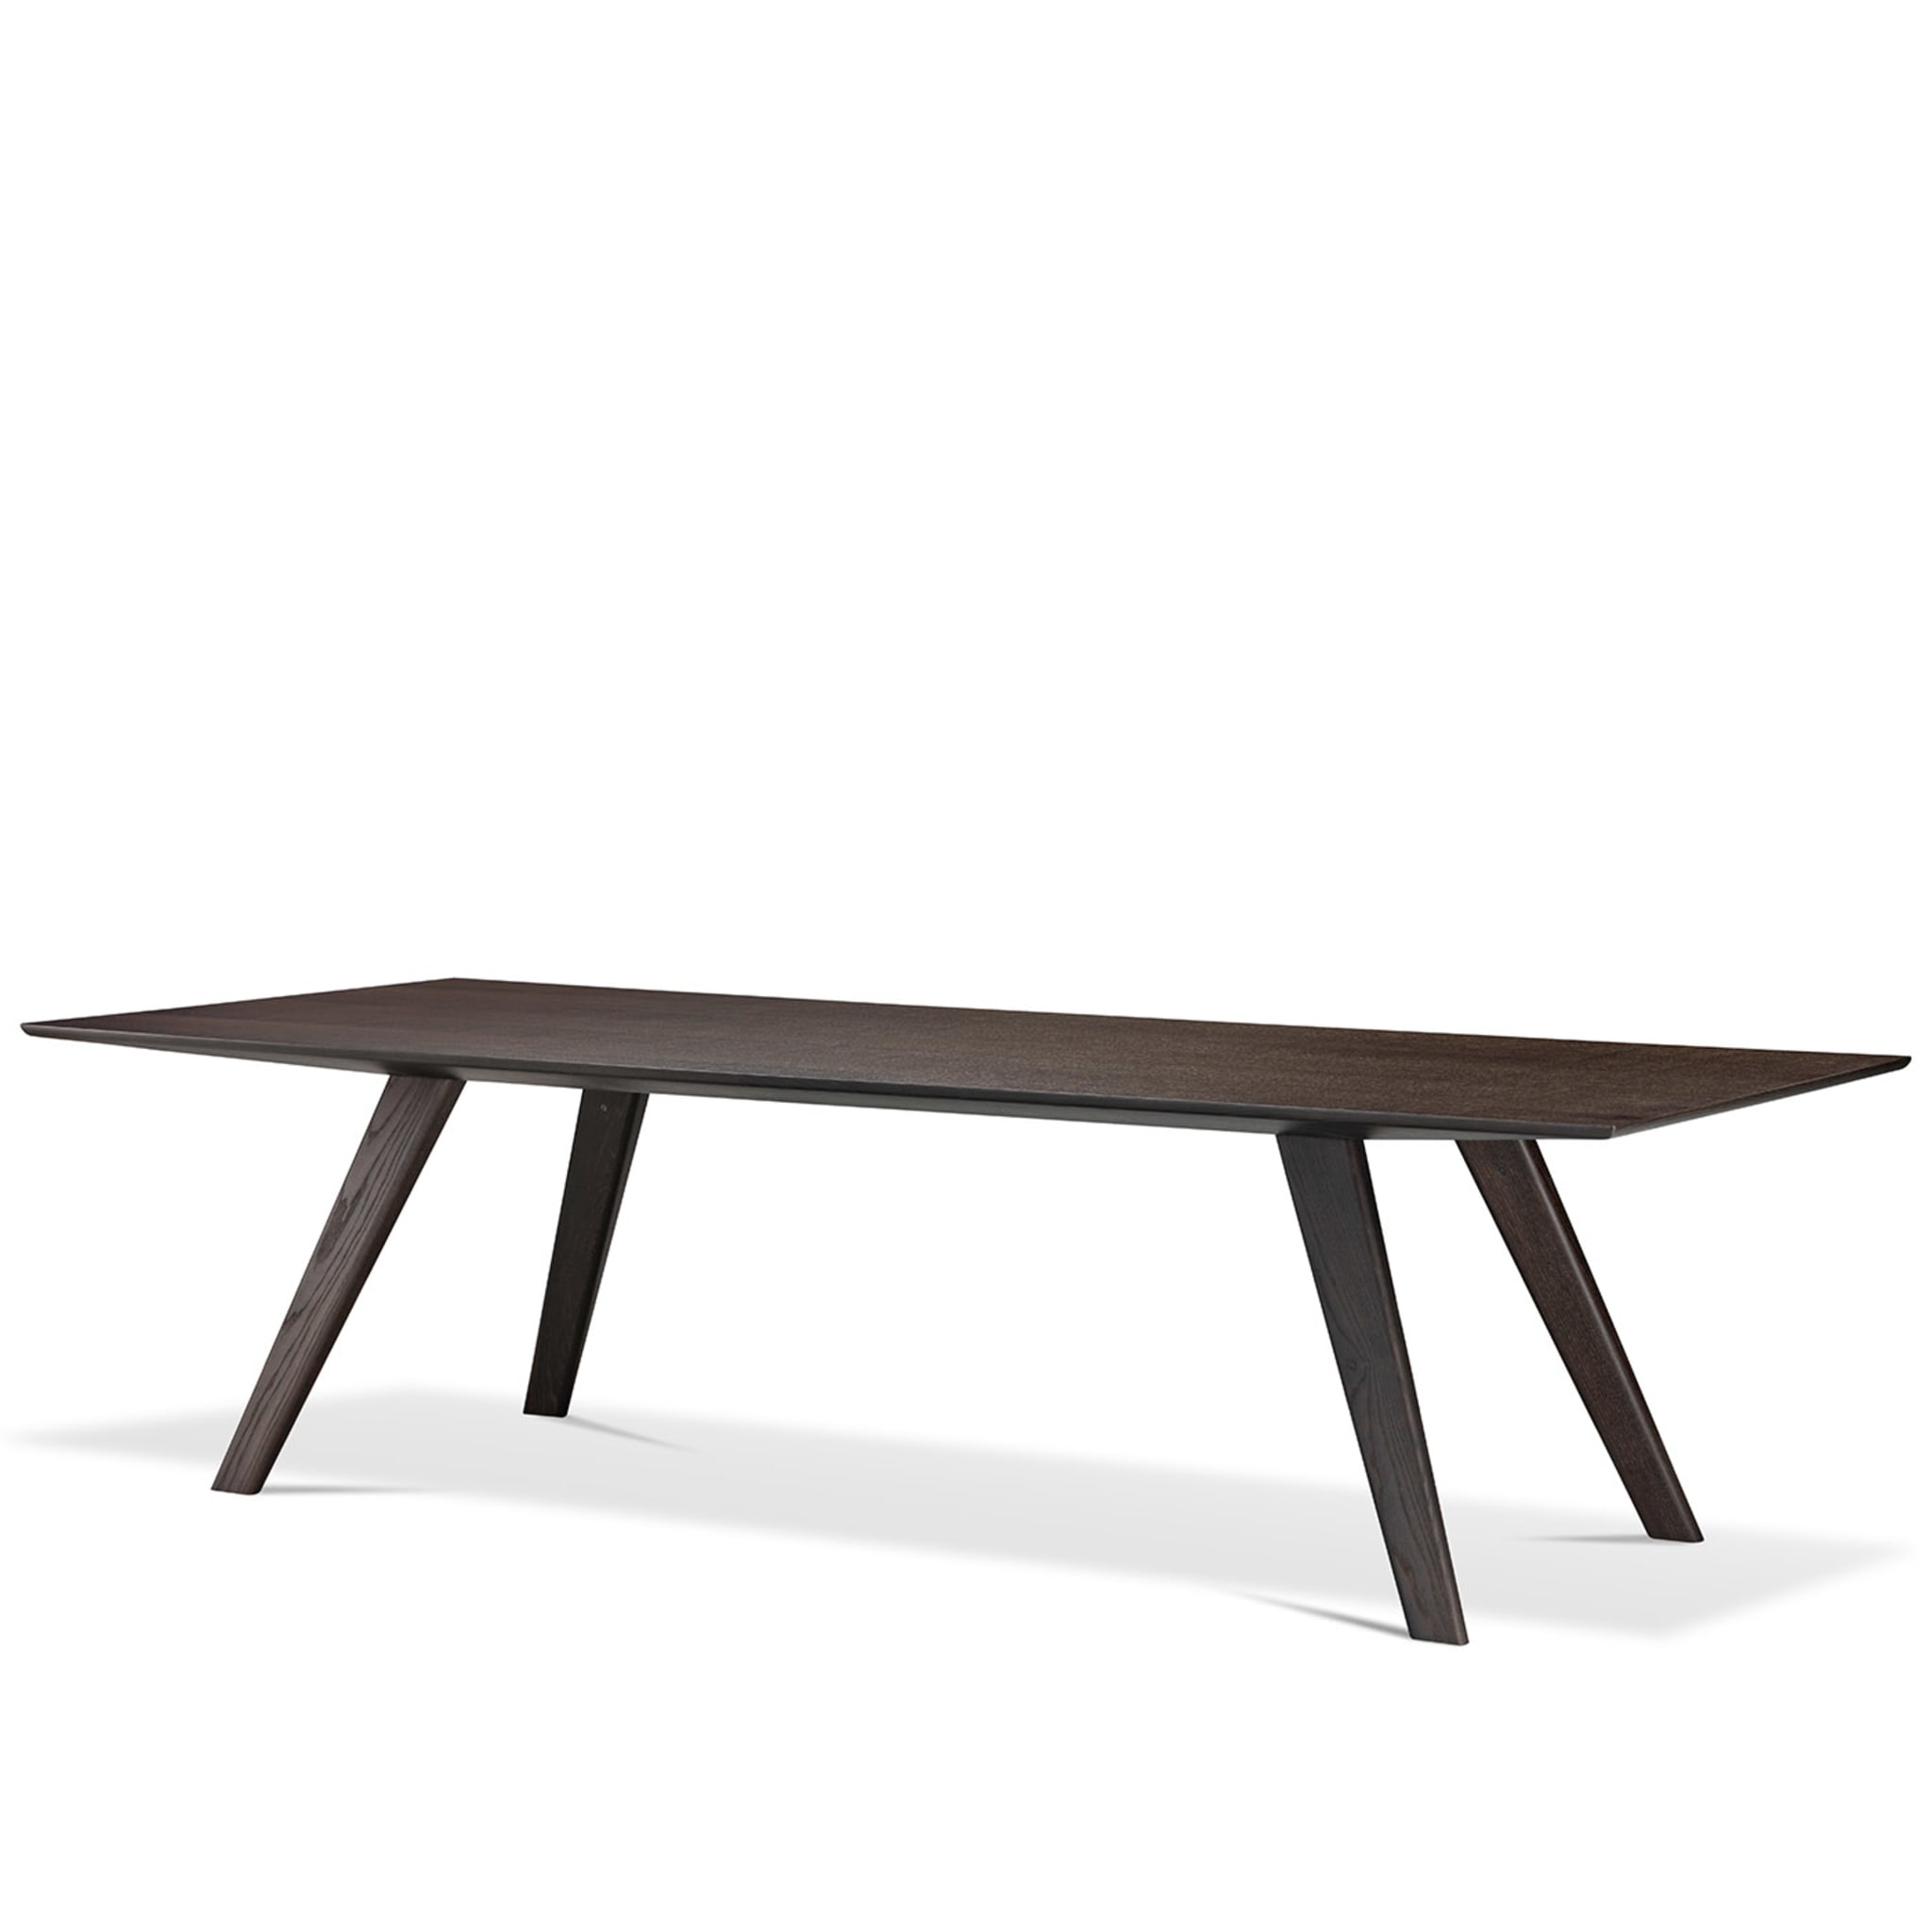 Locust Brown Dining Table by Stefano Giovannoni - Alternative view 3